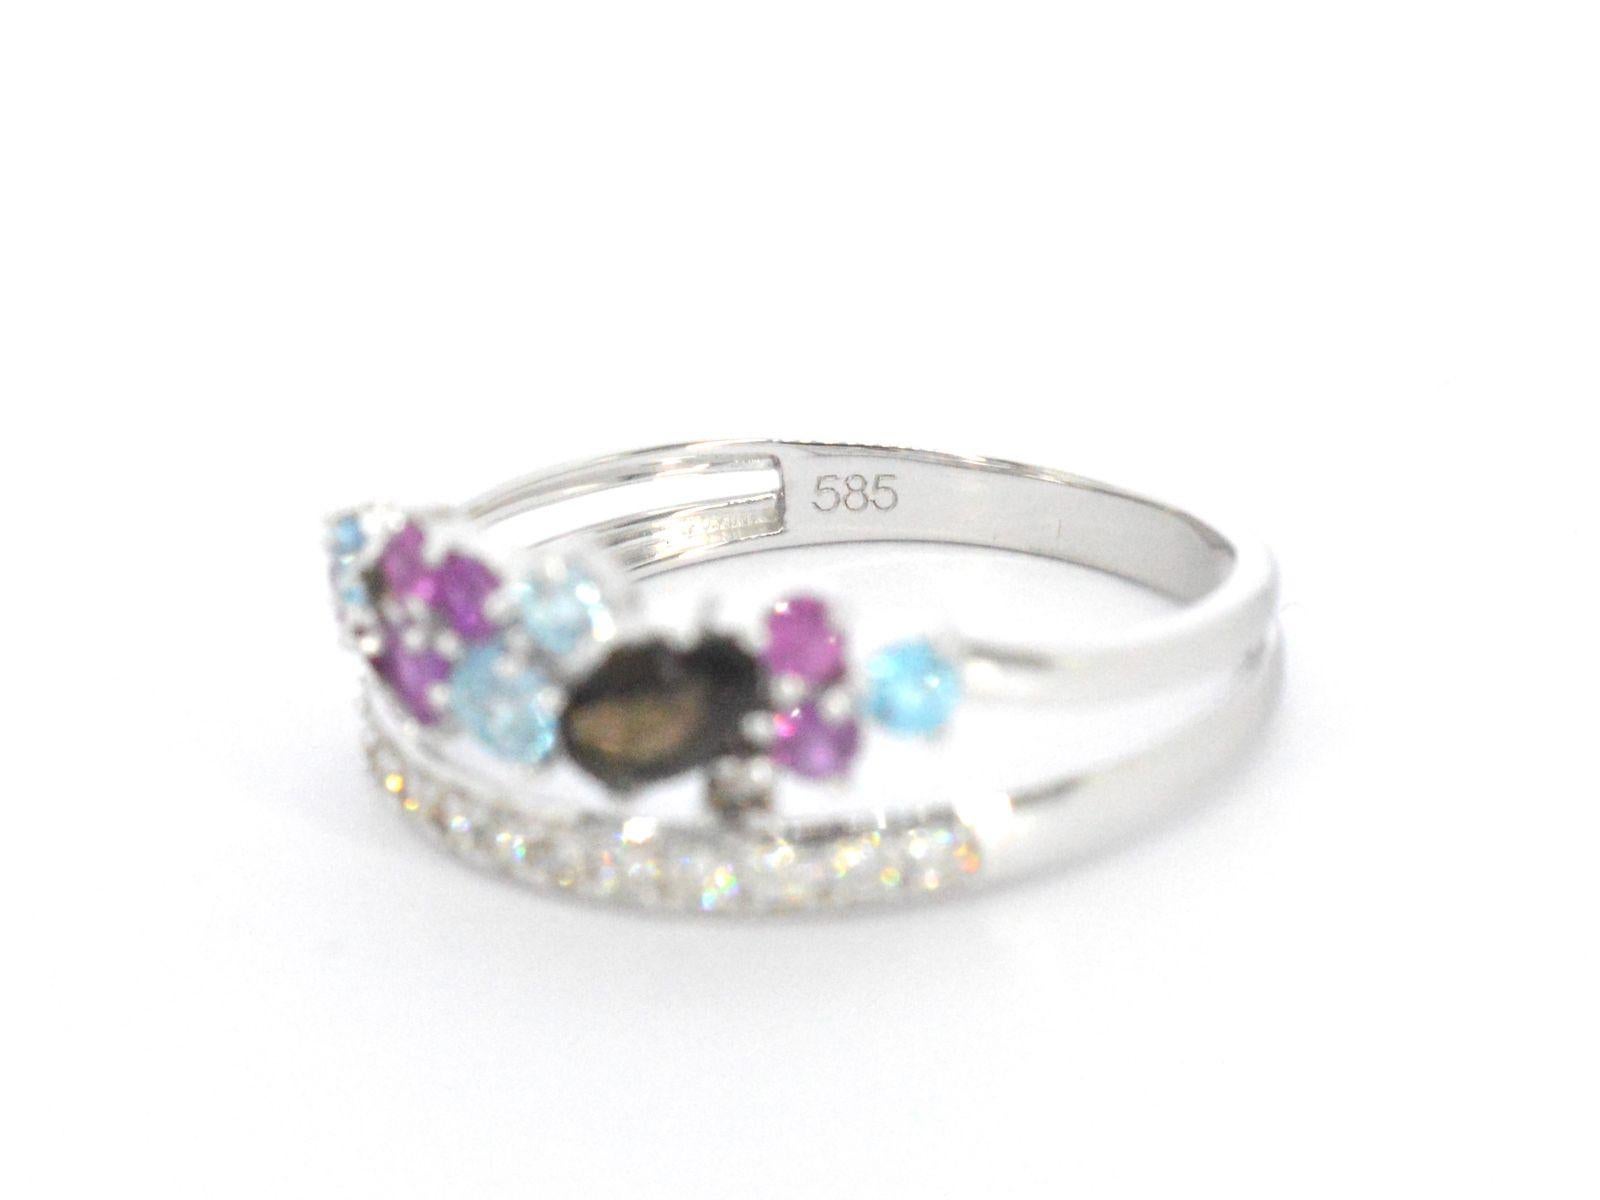 Women's White Gold Ring with Diamonds and Beautiful Gemstones For Sale